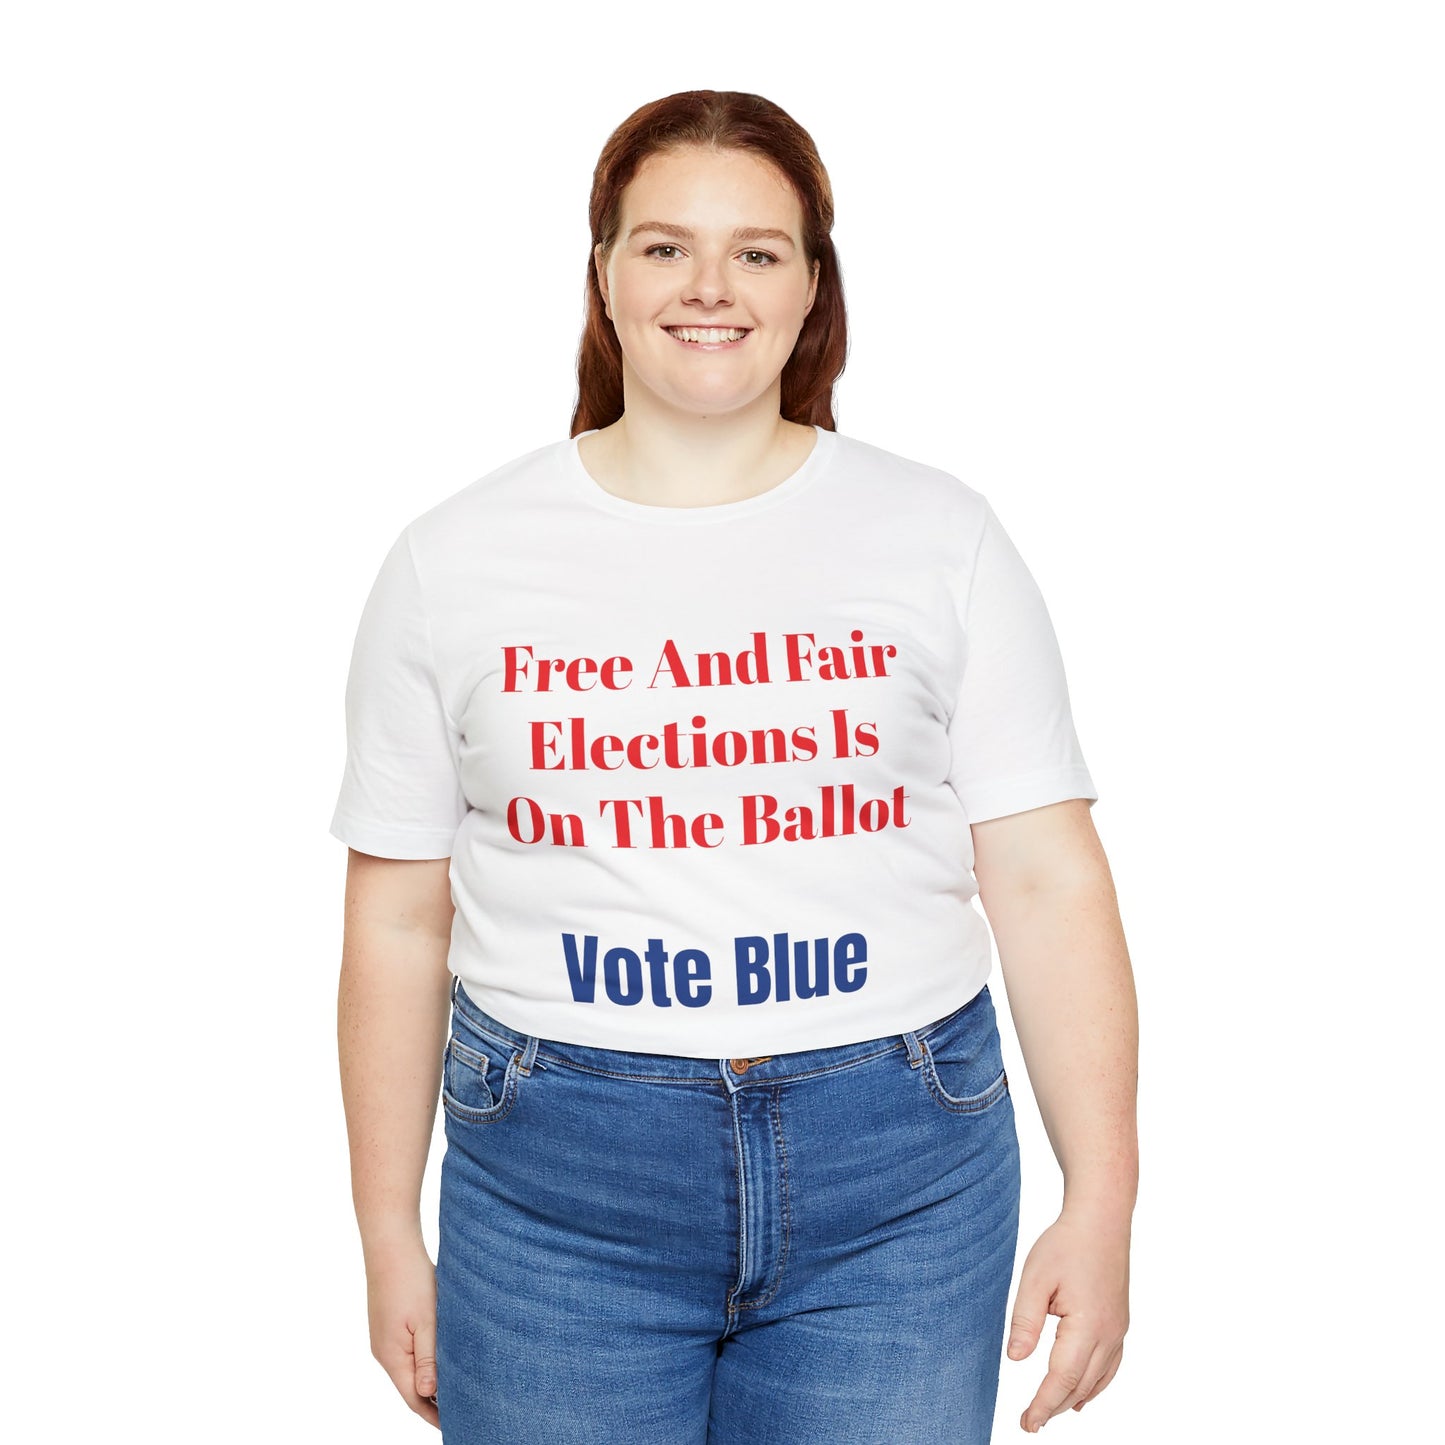 Free And Fair Elections Is On The Ballot